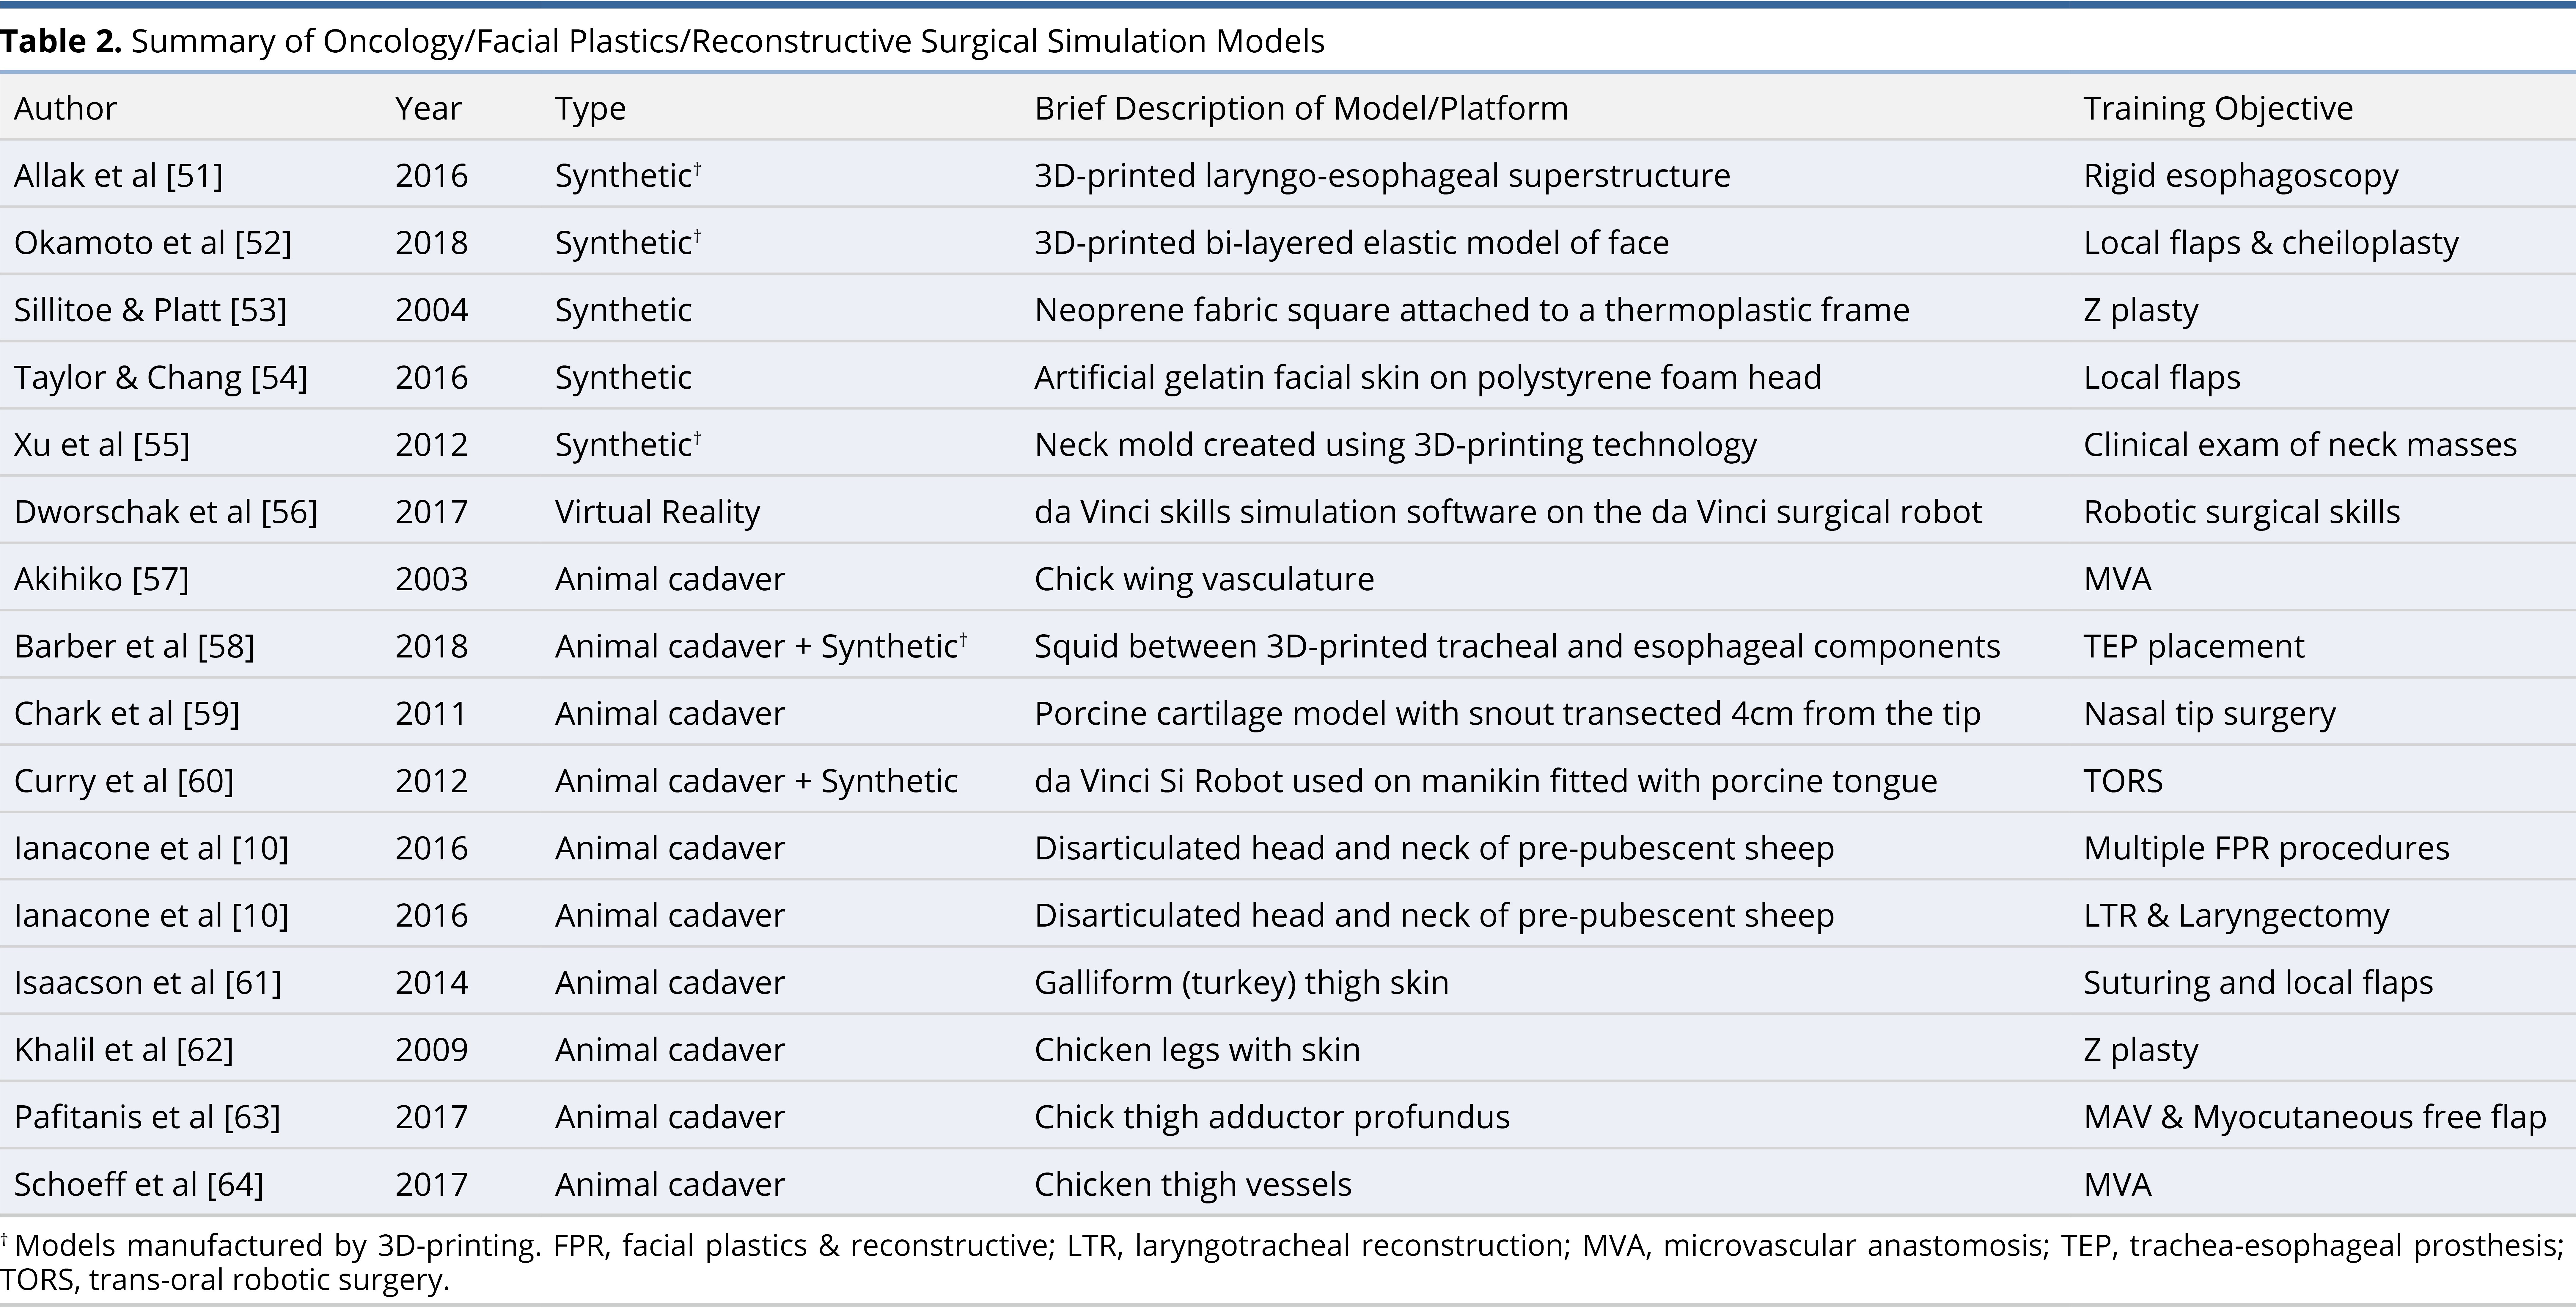 Table 2.jpgSummary of Oncology/Facial Plastics/Reconstructive Surgical Simulation Models